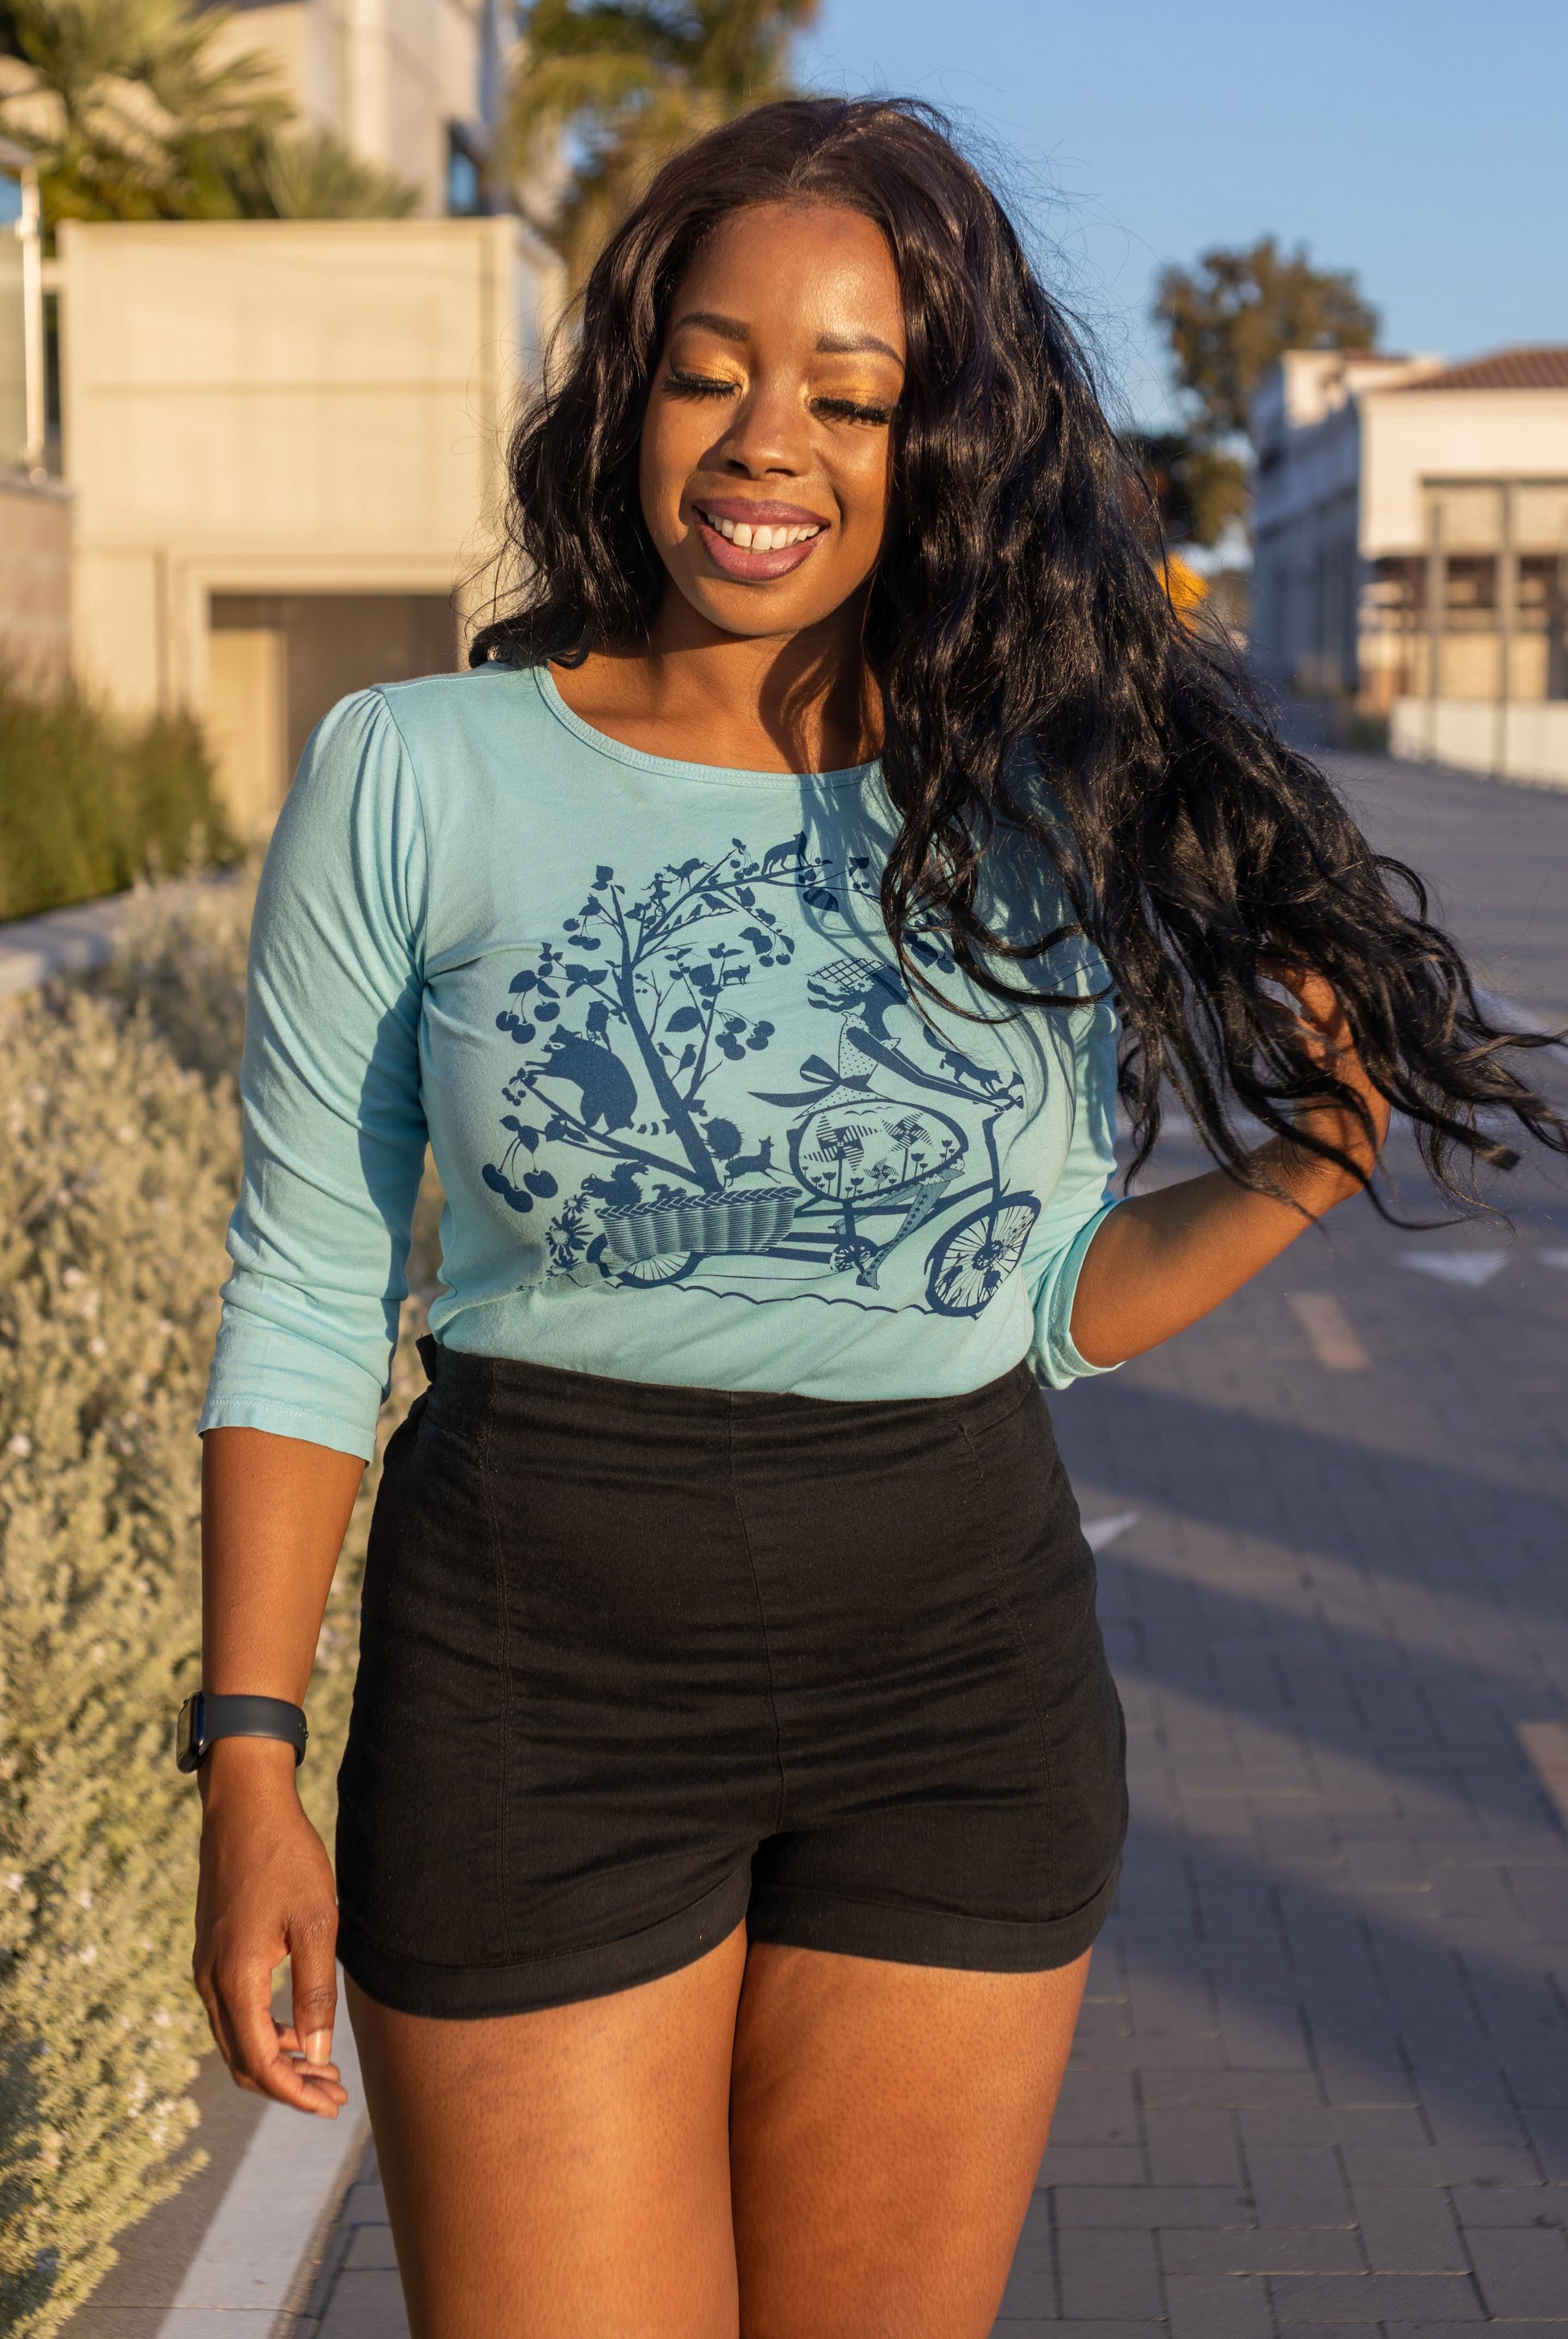 Smiling model in blue 3/4 sleeve tee with print of girl riding bicycle, worn with black shorts